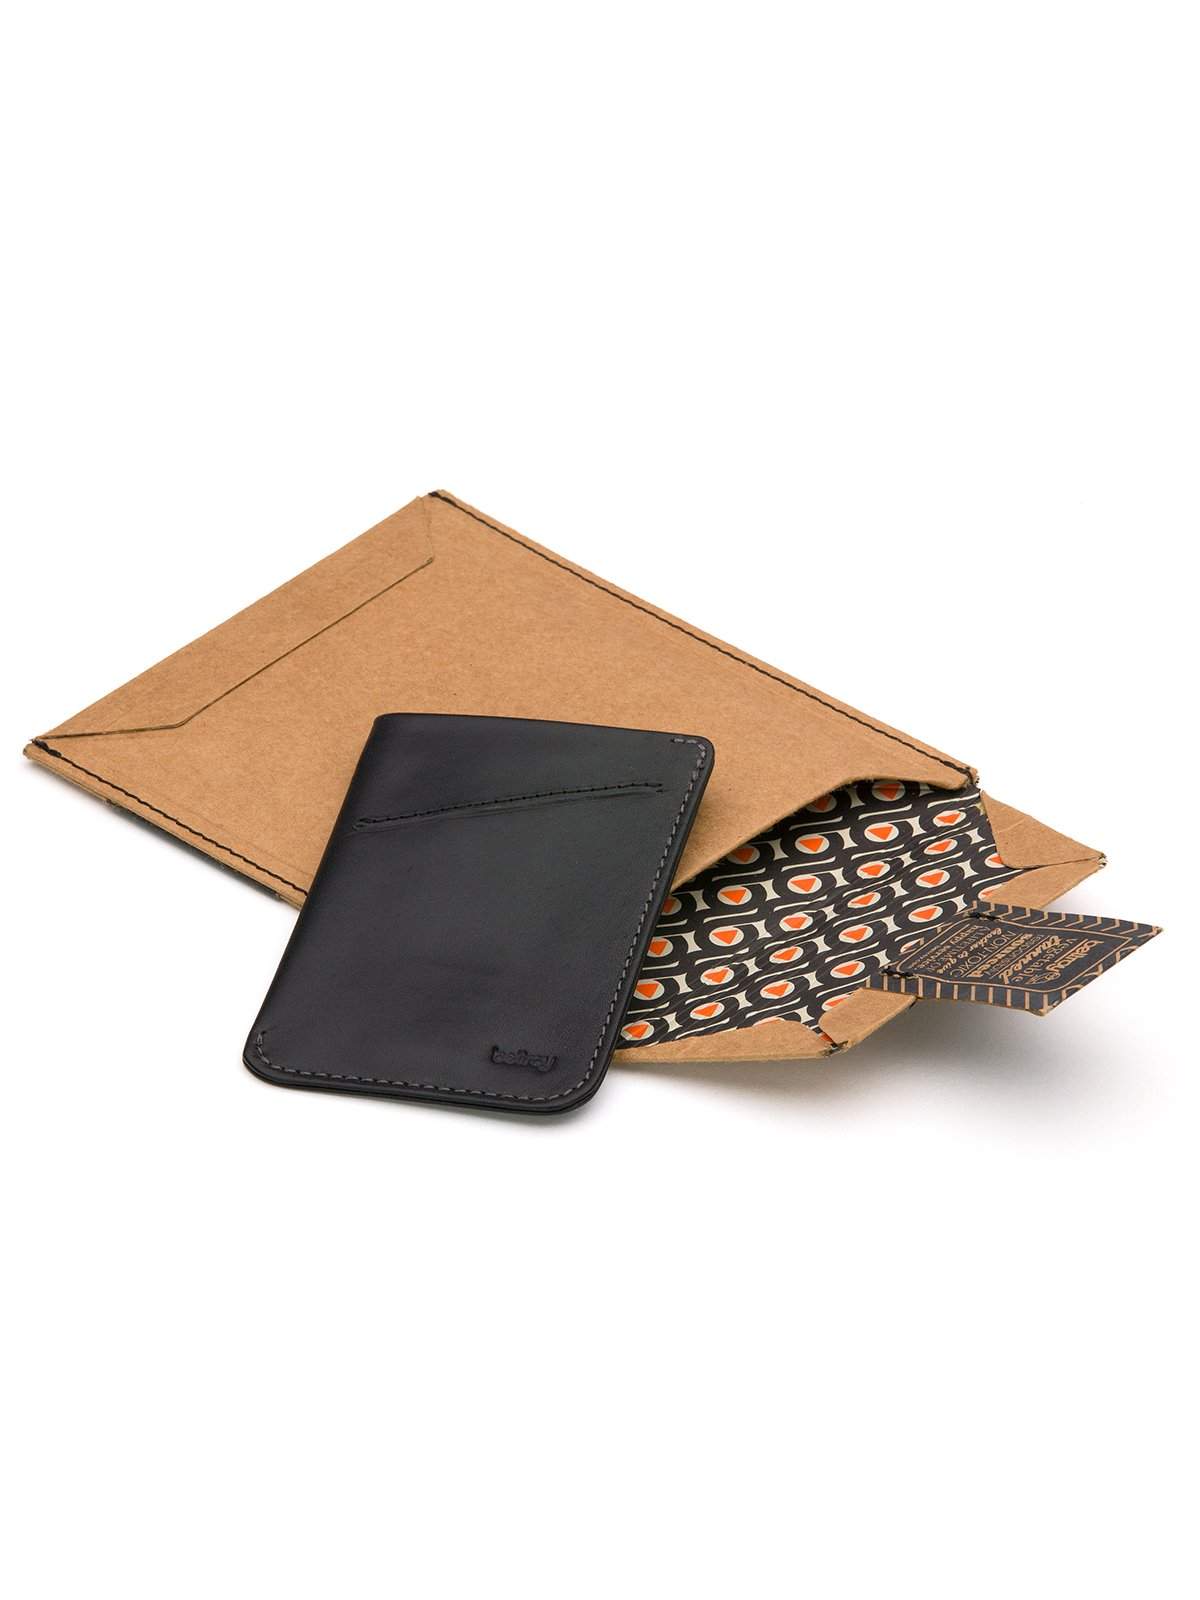 Bellroy Card Sleeve Black - MORE by Morello Indonesia